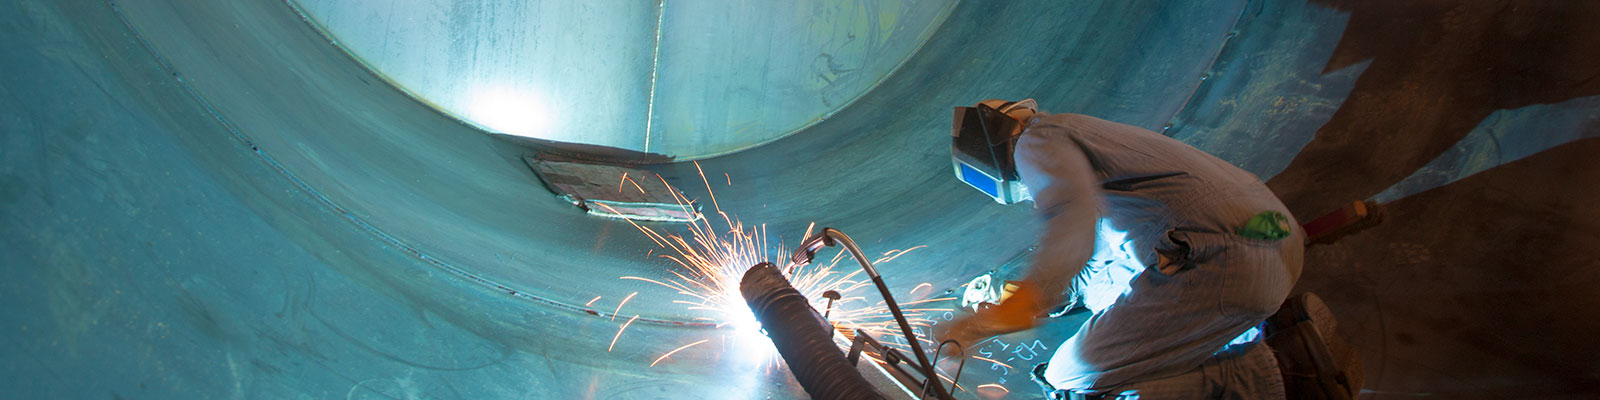 Welder working inside of a large pipe